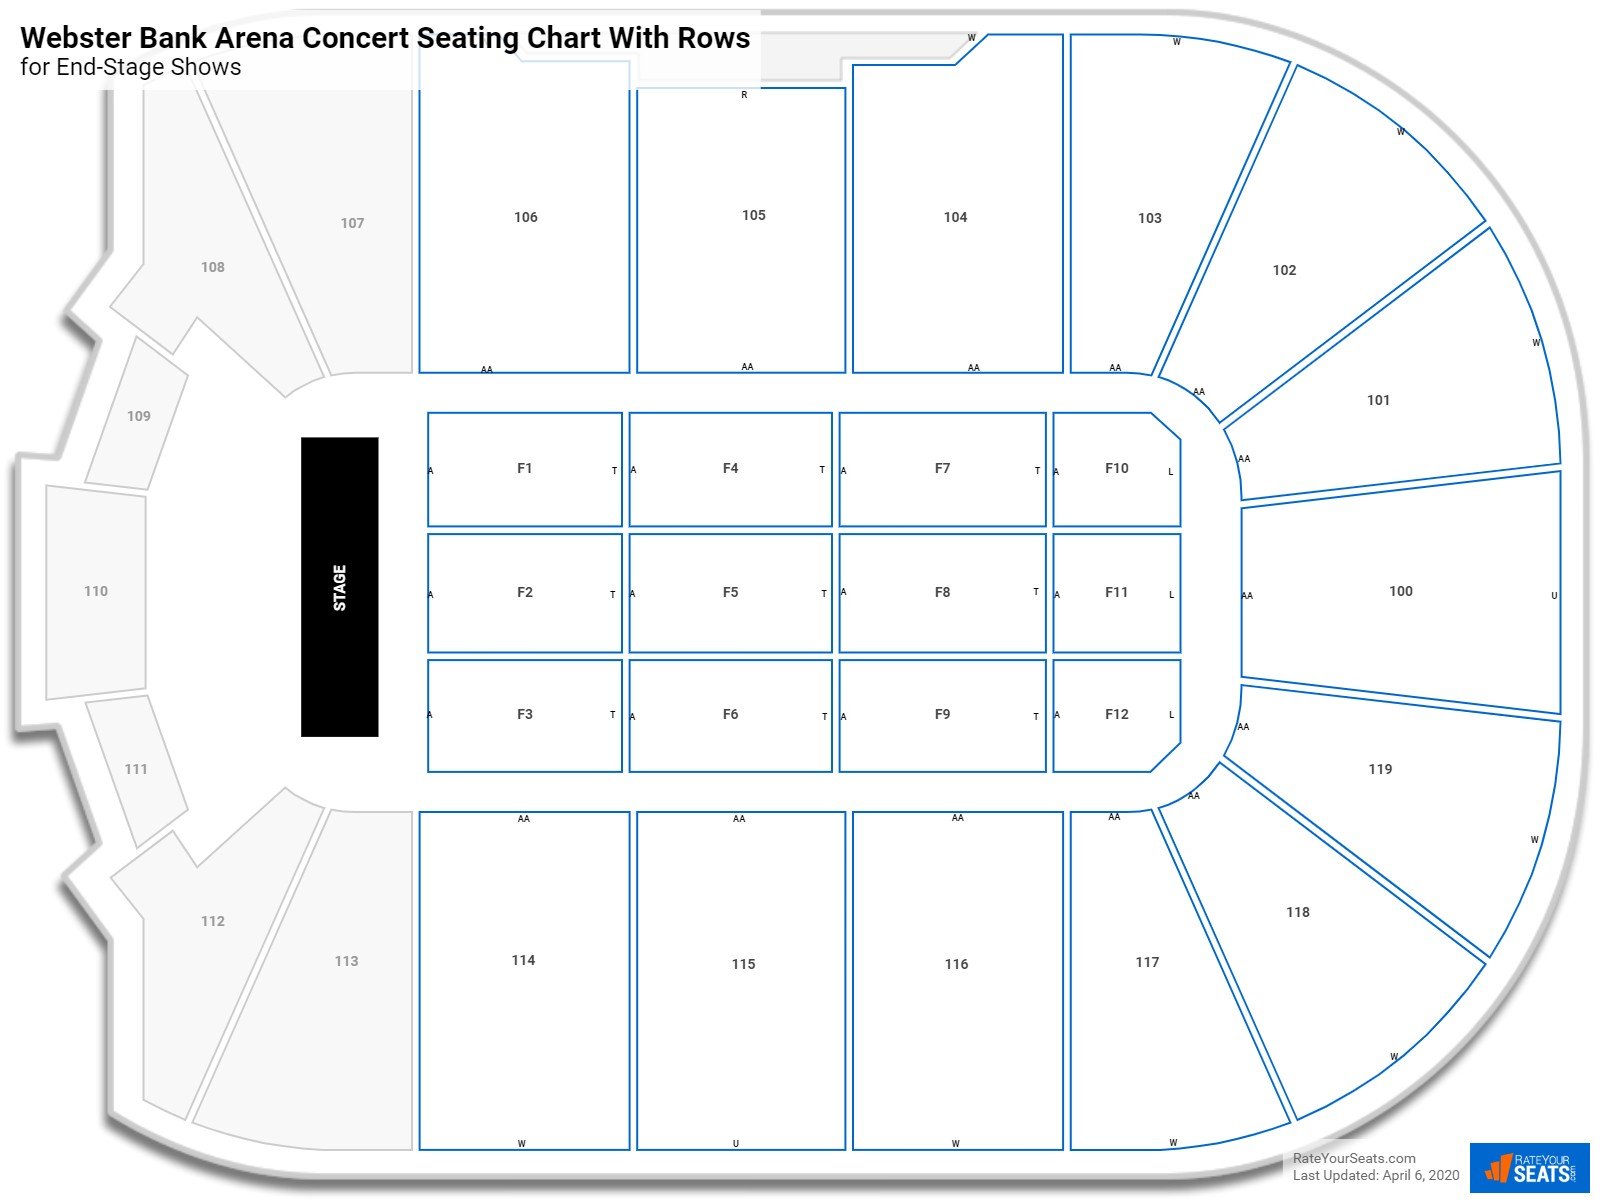 Webster Bank Arena seating chart with row numbers